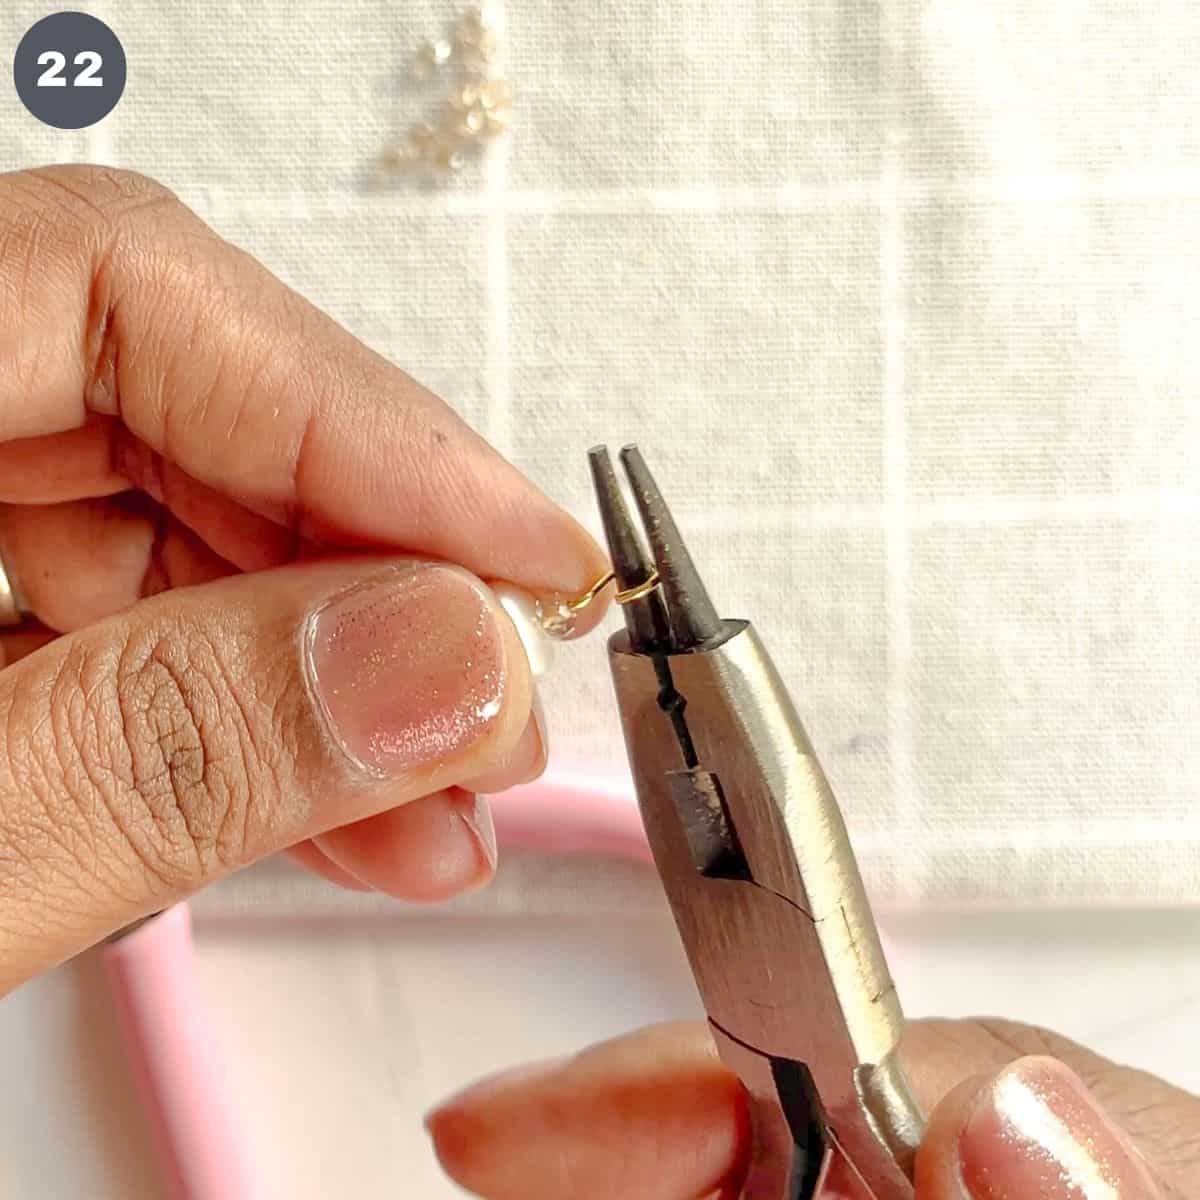 Making a loop at the end of an eye pin with pliers.